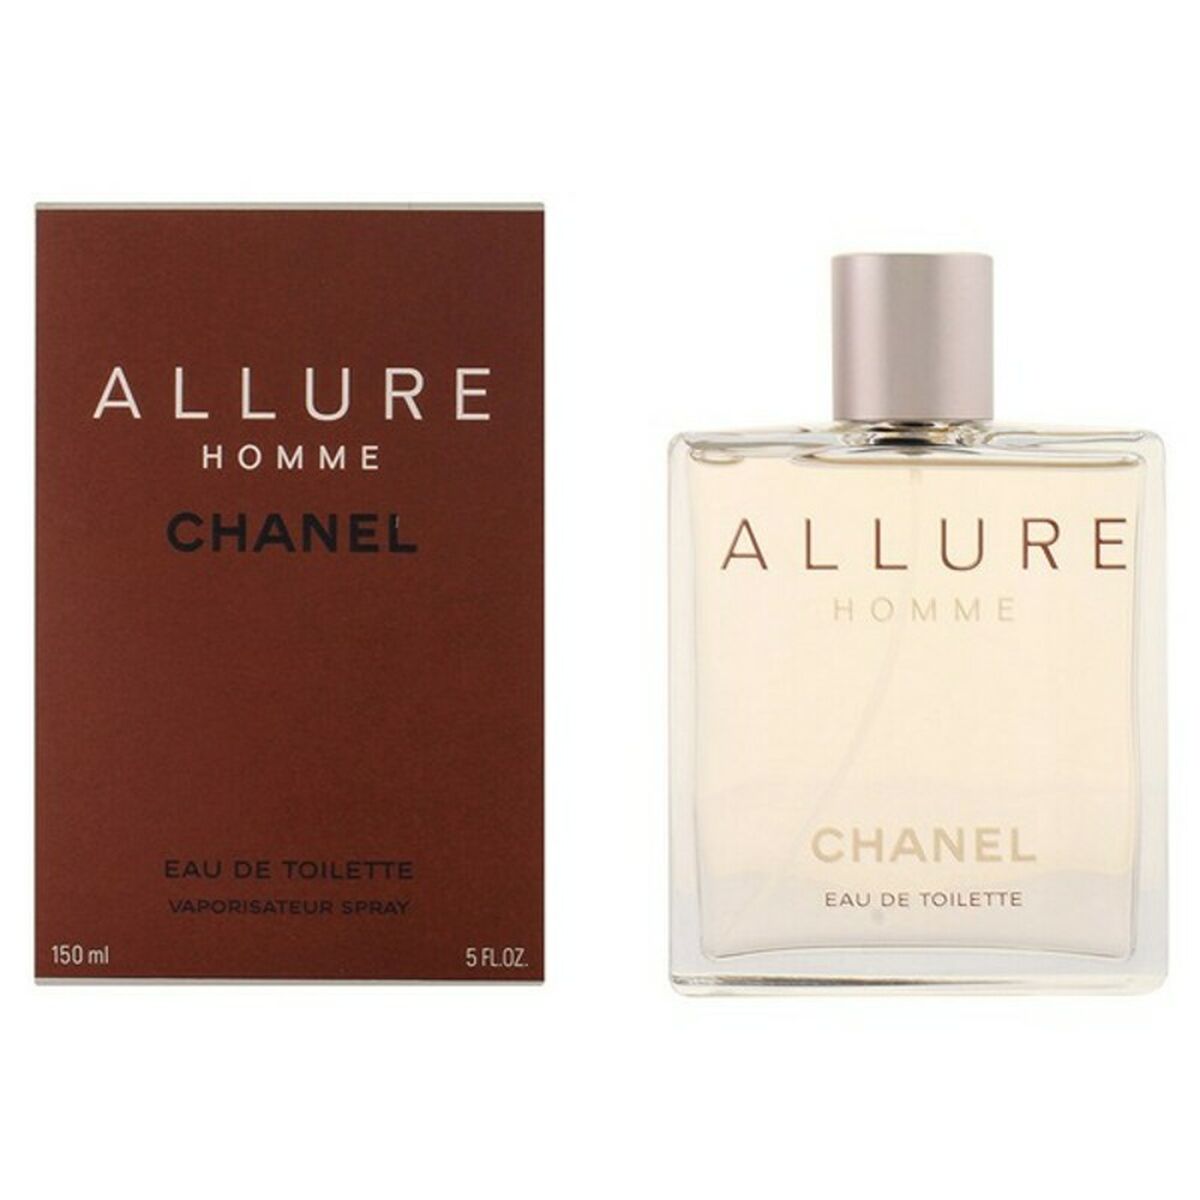 Chanel Allure Homme Sport fragrance. Fresh, sporty, and active. Seaso